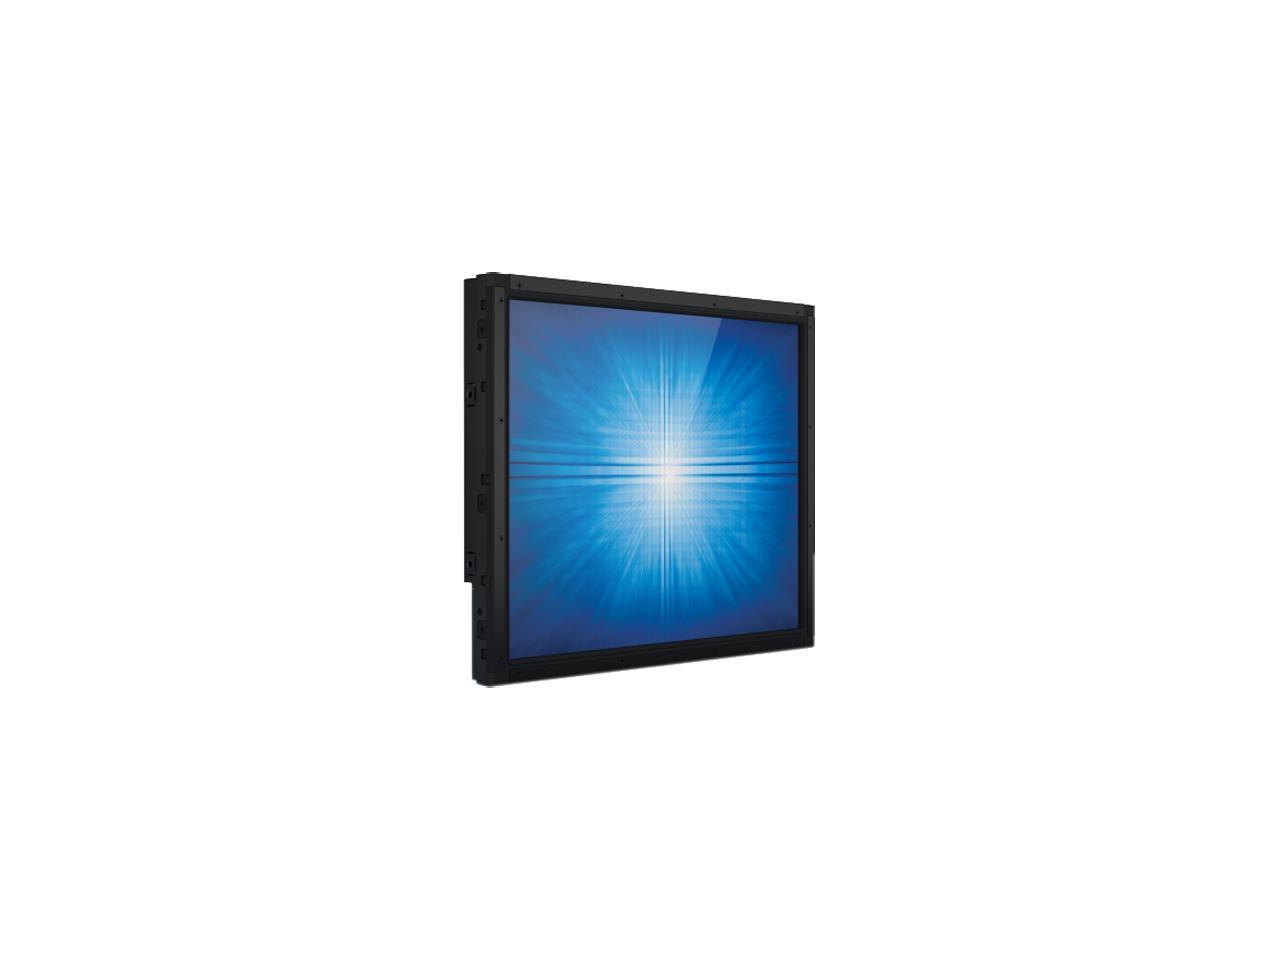 Elo E326541 1991L 19" Open-frame Commercial-grade Touchscreen Display with AccuTouch - image 3 of 5